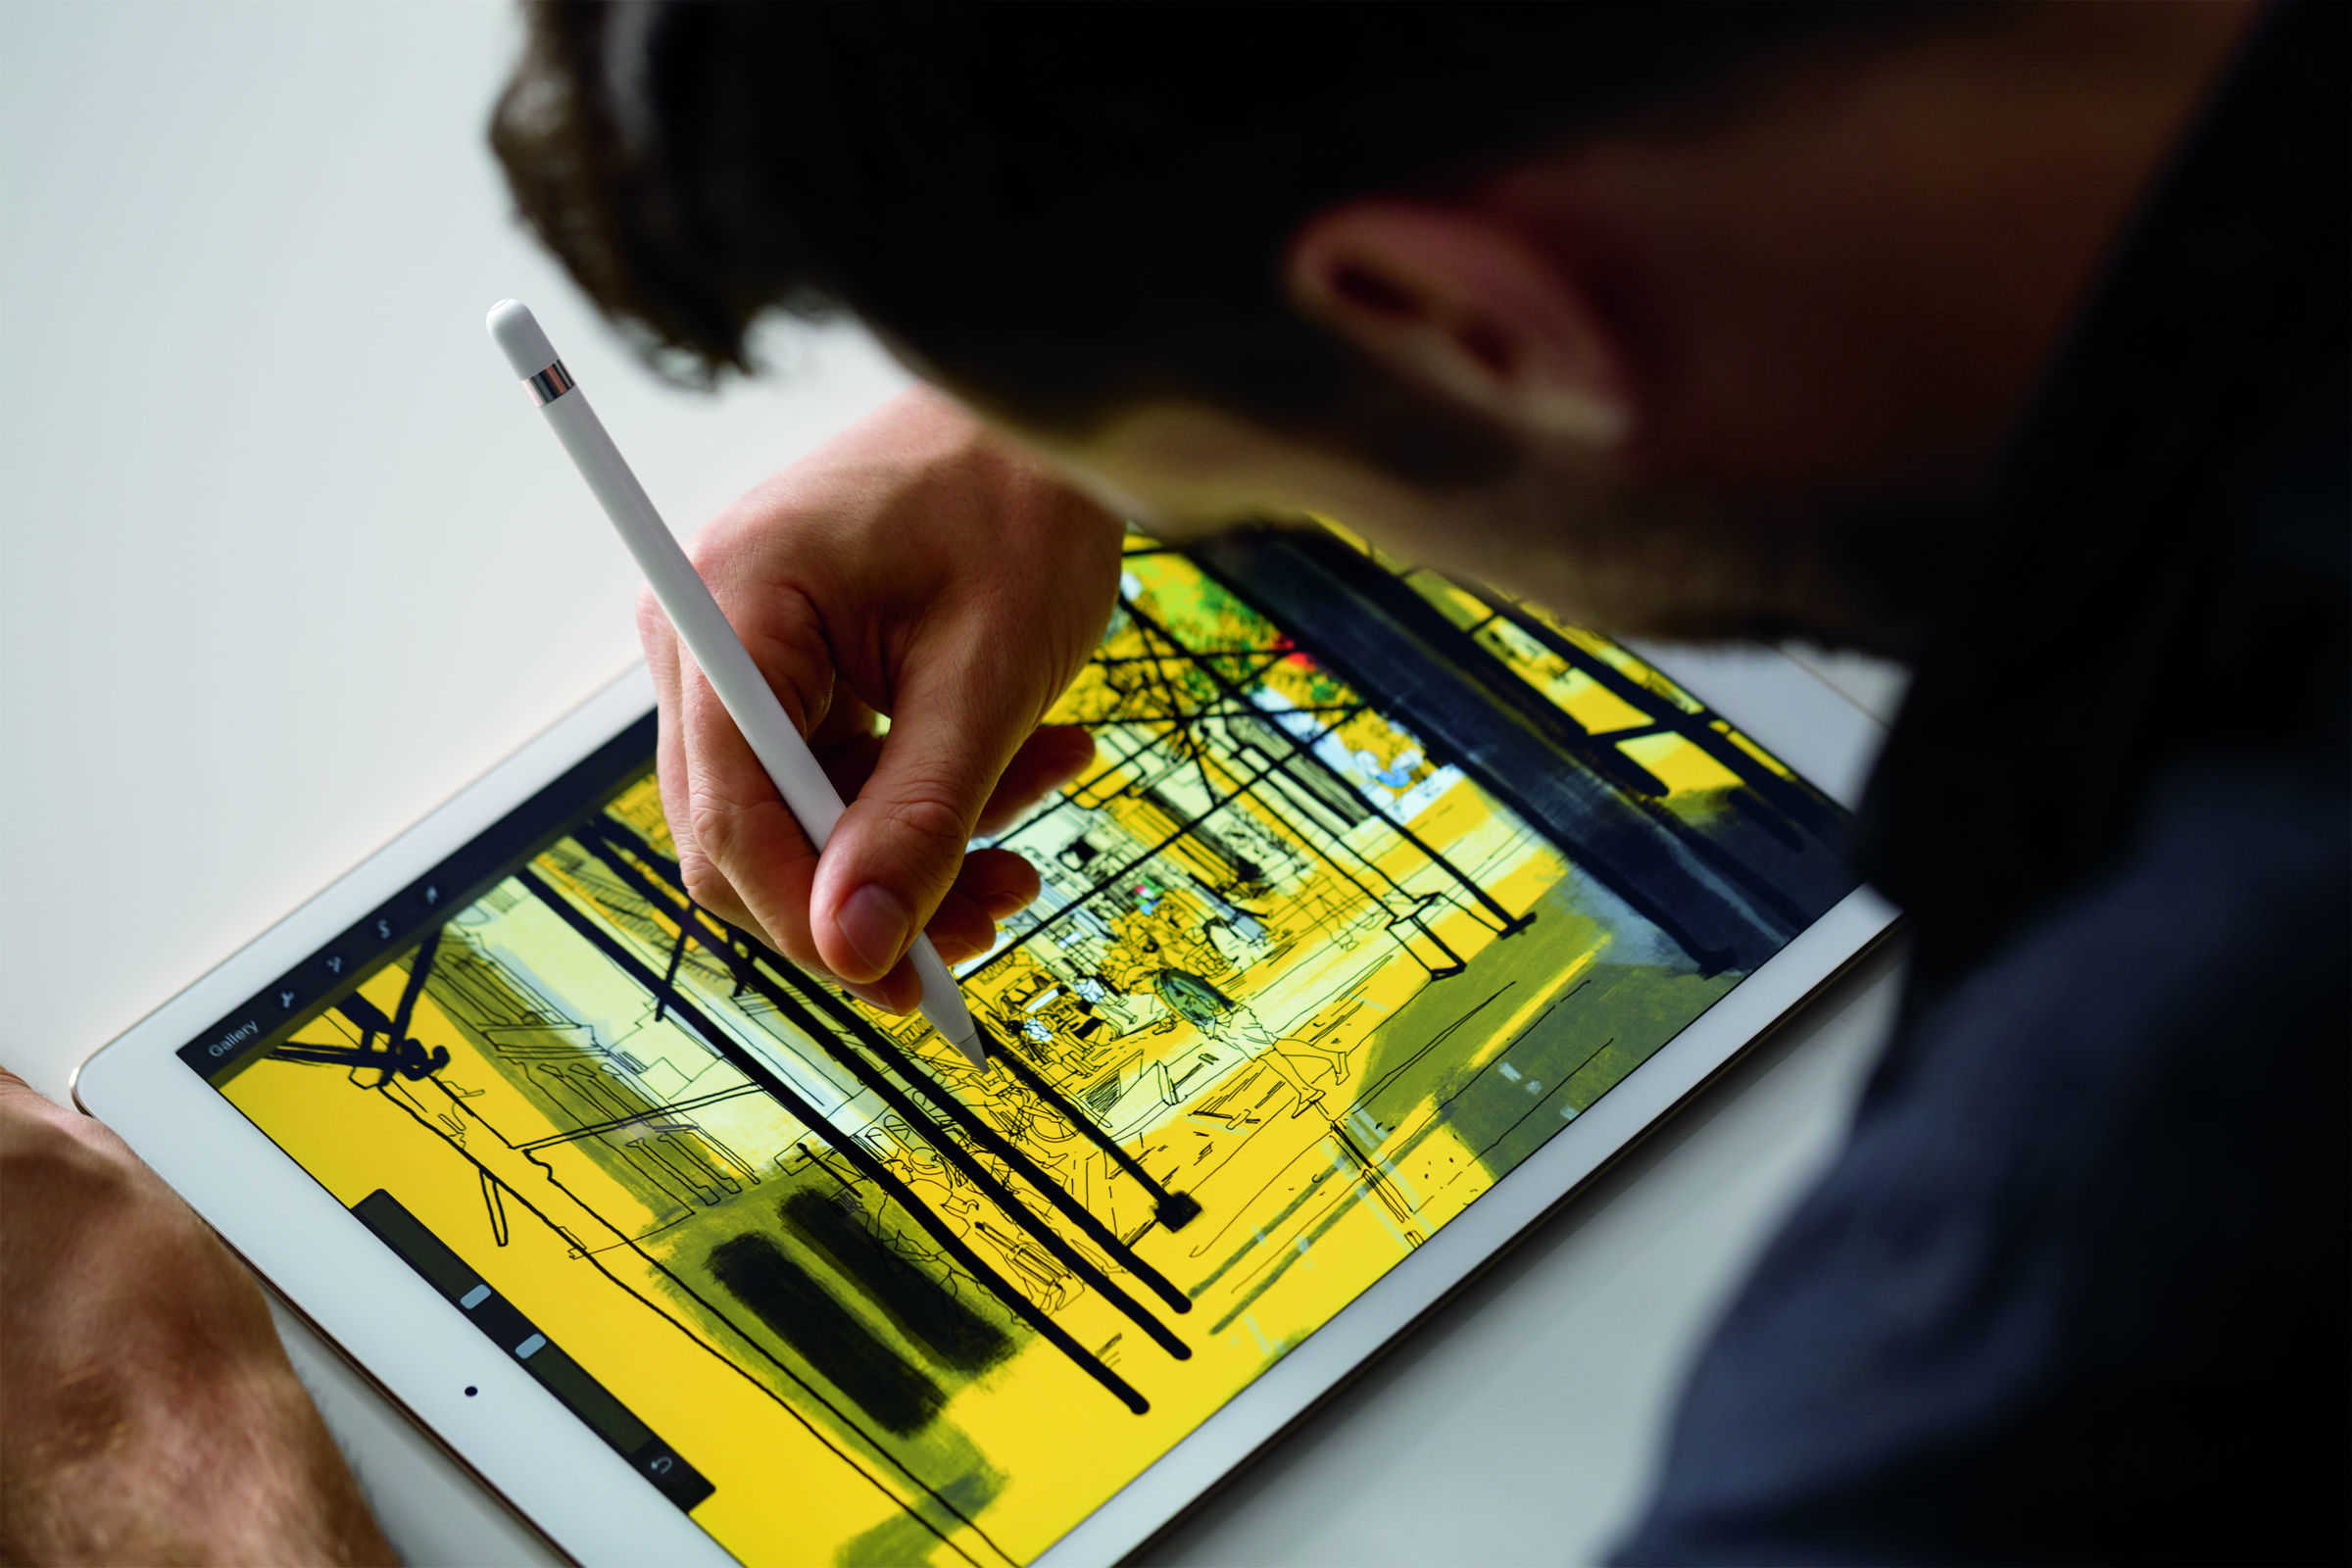 The Apple Pencil makes drawing on an iPad Pro incredibly precise.